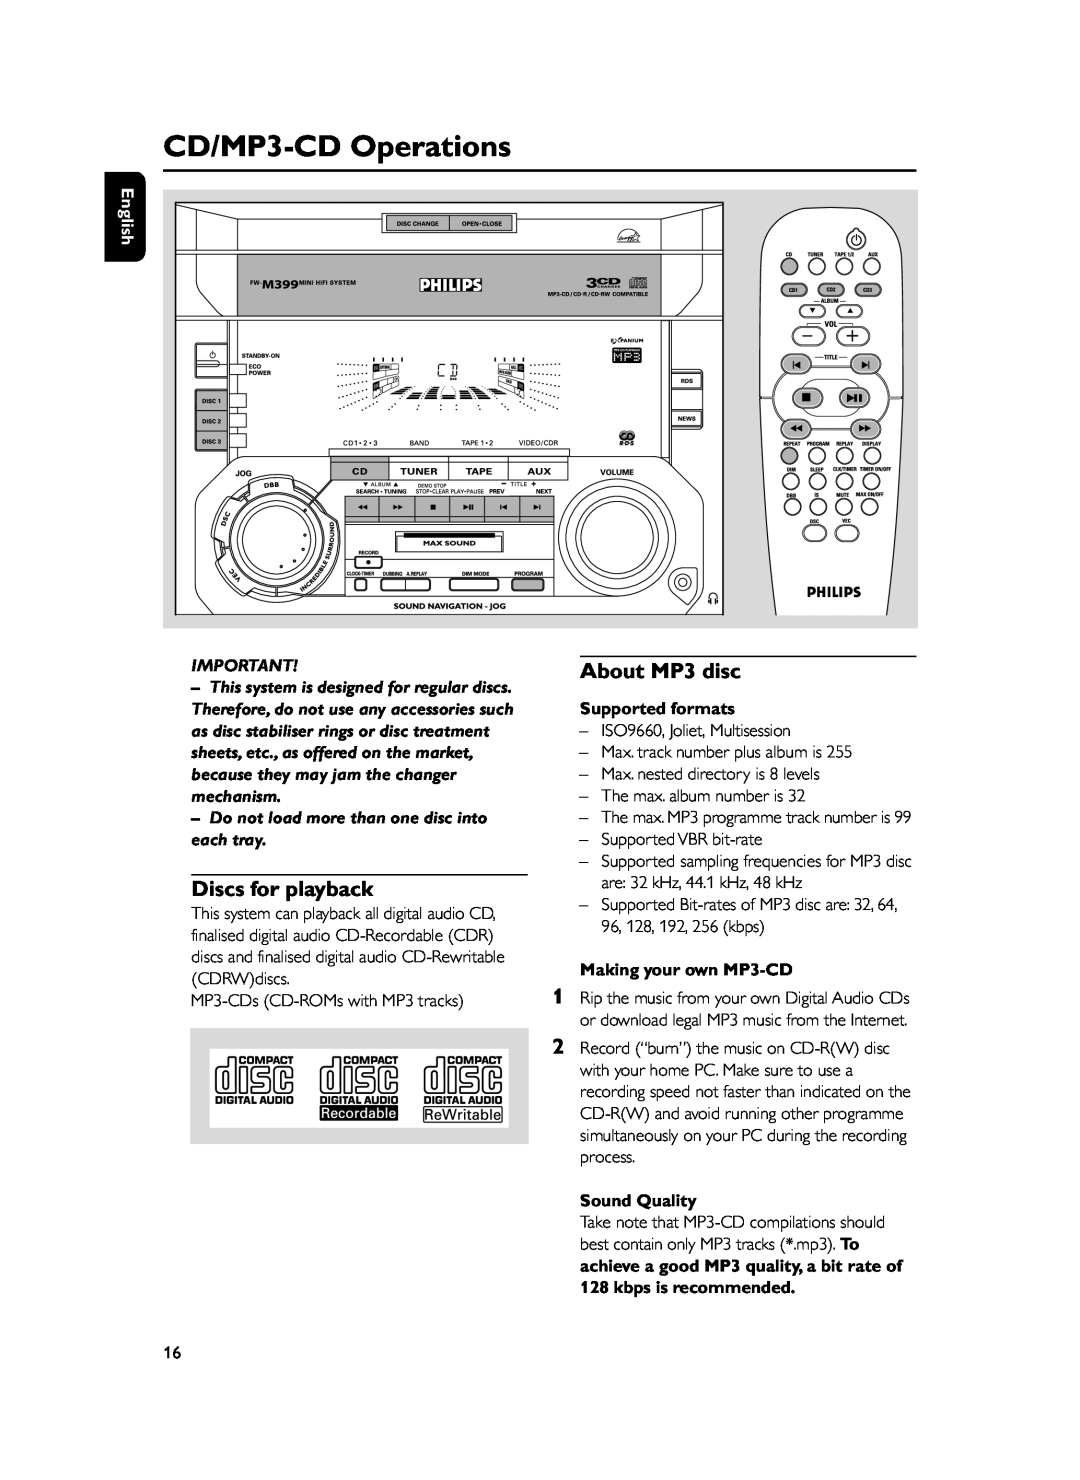 Philips FWM399 manual CD/MP3-CDOperations, Discs for playback, About MP3 disc, Supported formats, Making your own MP3-CD 